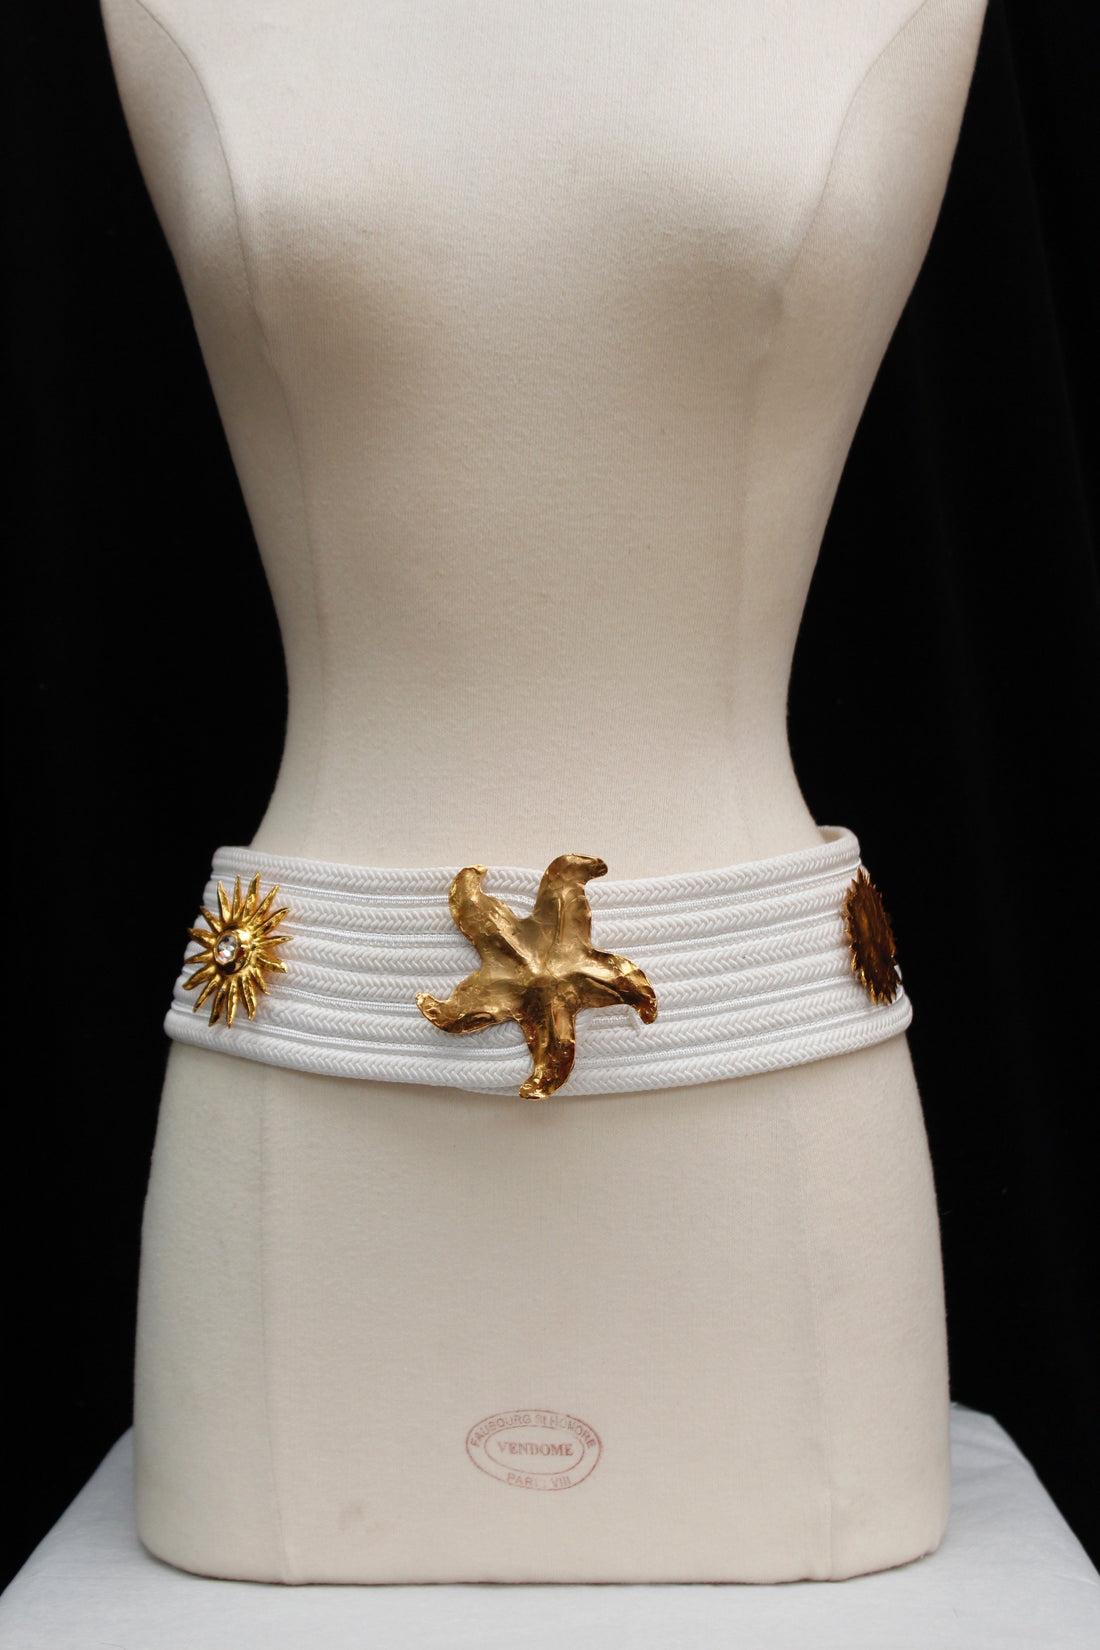 Yves Saint Laurent (Made in France) Belt composed of white passementerie, decorated with elements in hammered gilded metal

Additional information: 
Dimensions: Waist circumference: 73 cm (28.74 in) x Width: 7.8 cm (3.07 in) 

Condition: 
Very good